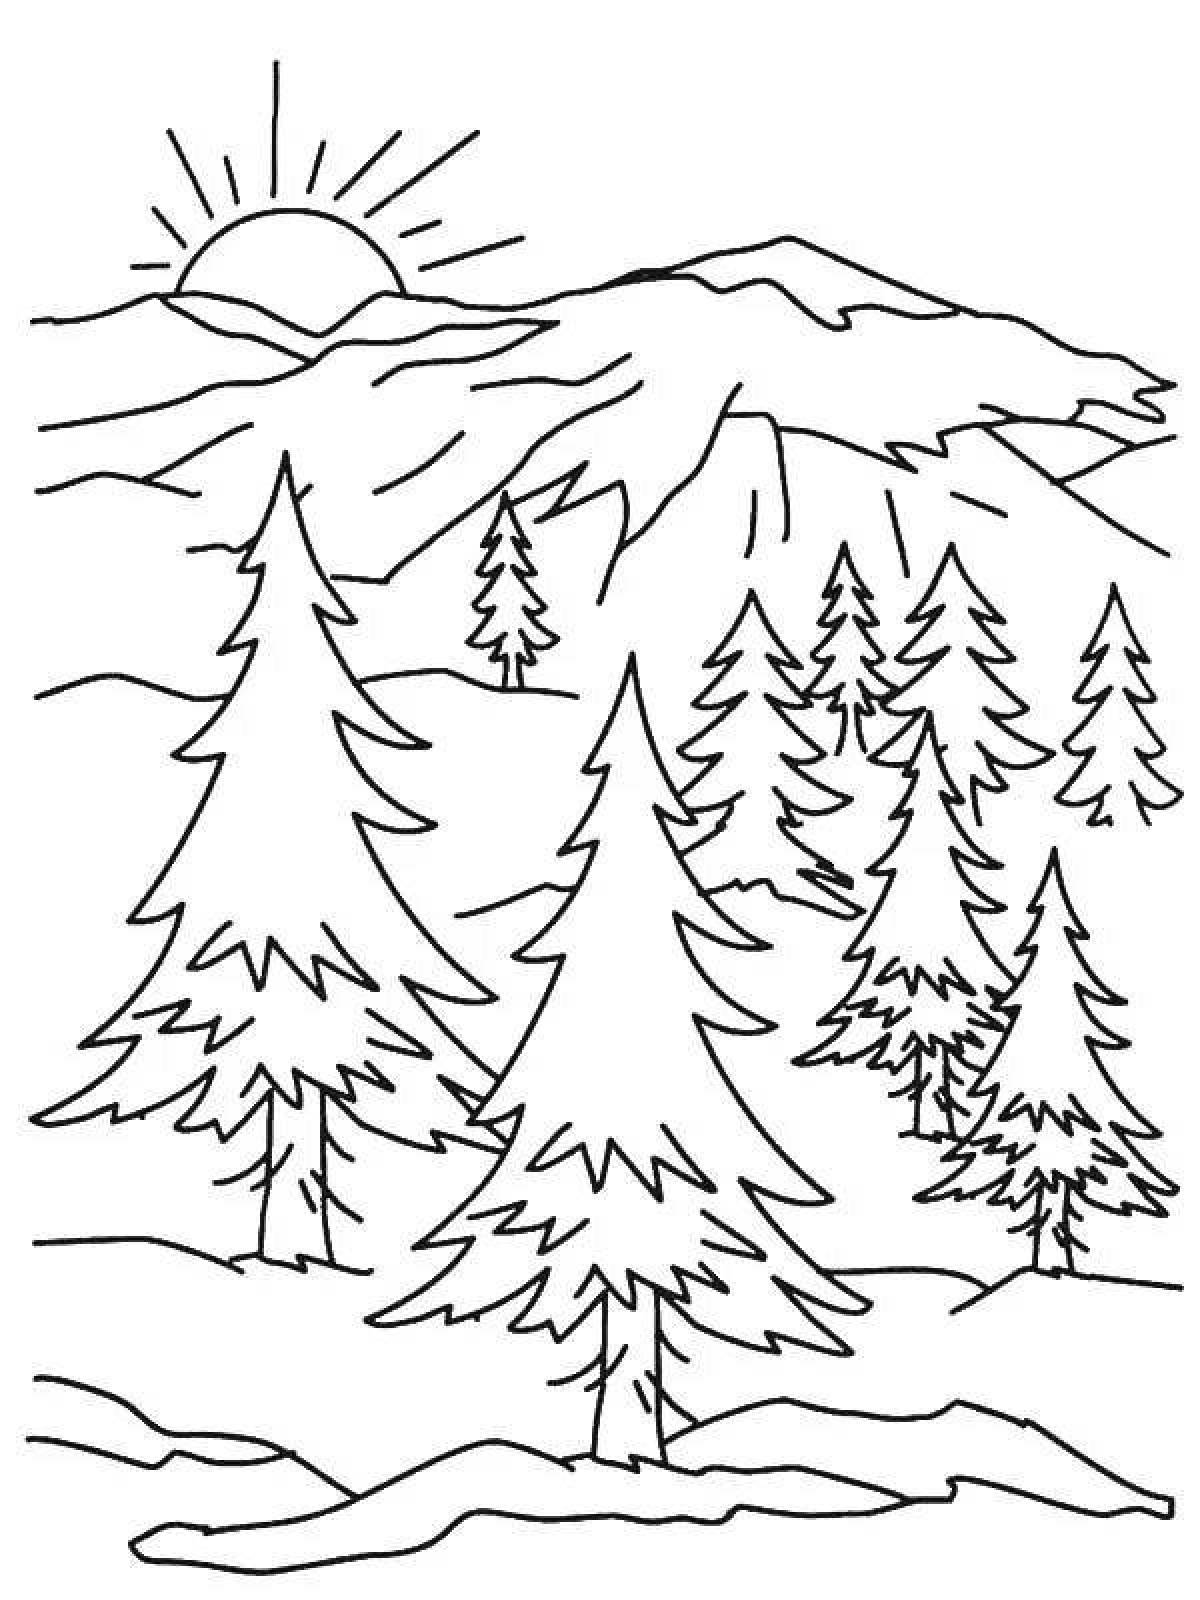 Coloring page magnanimous winter nature